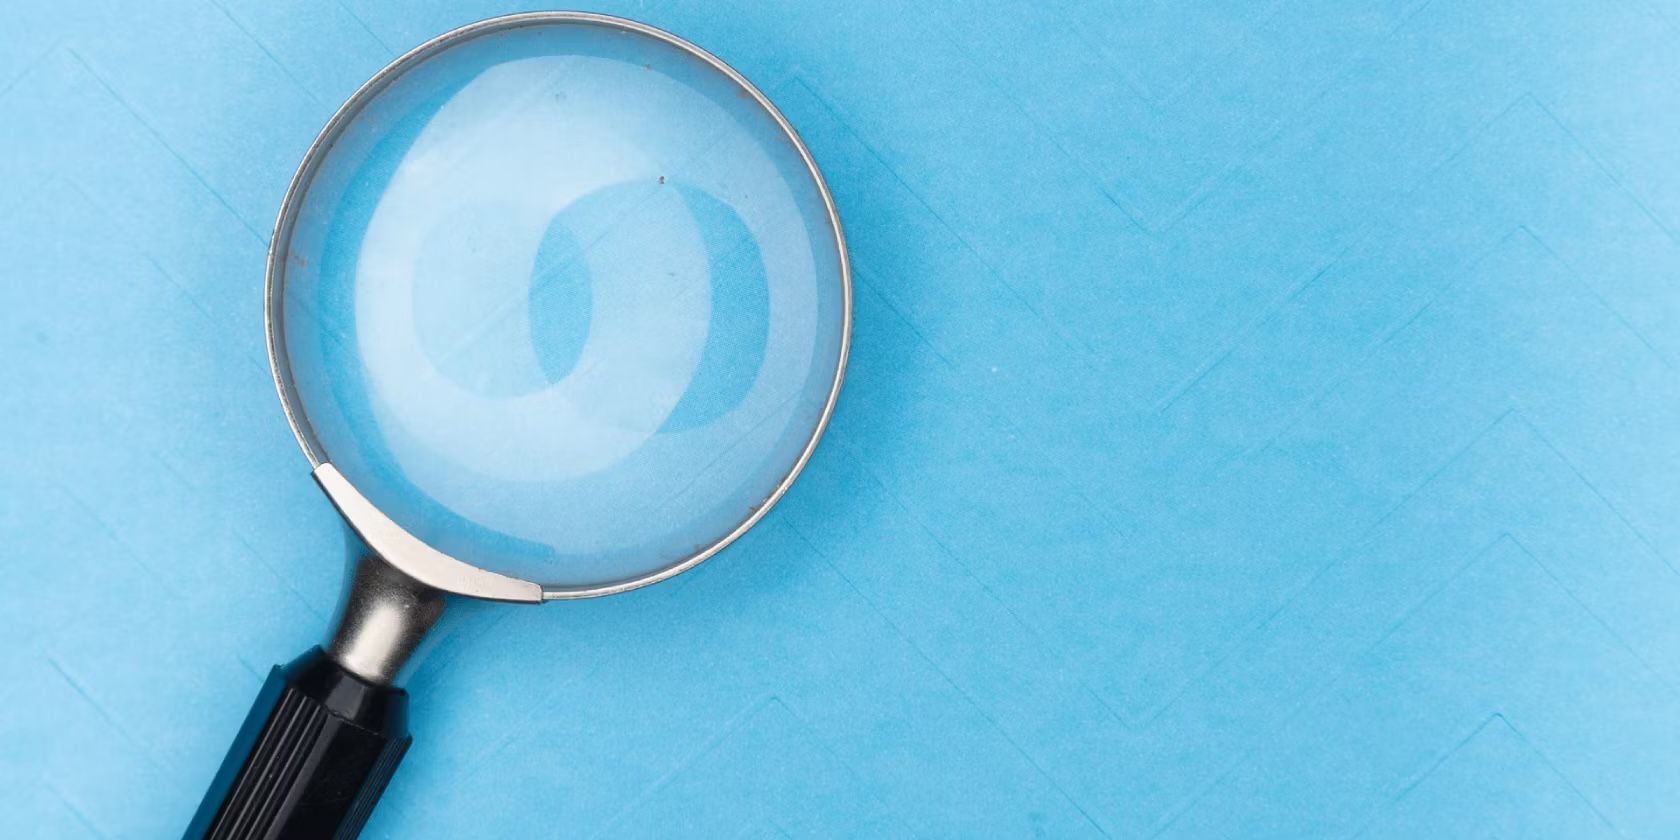 a magnifying glass on a light blue background